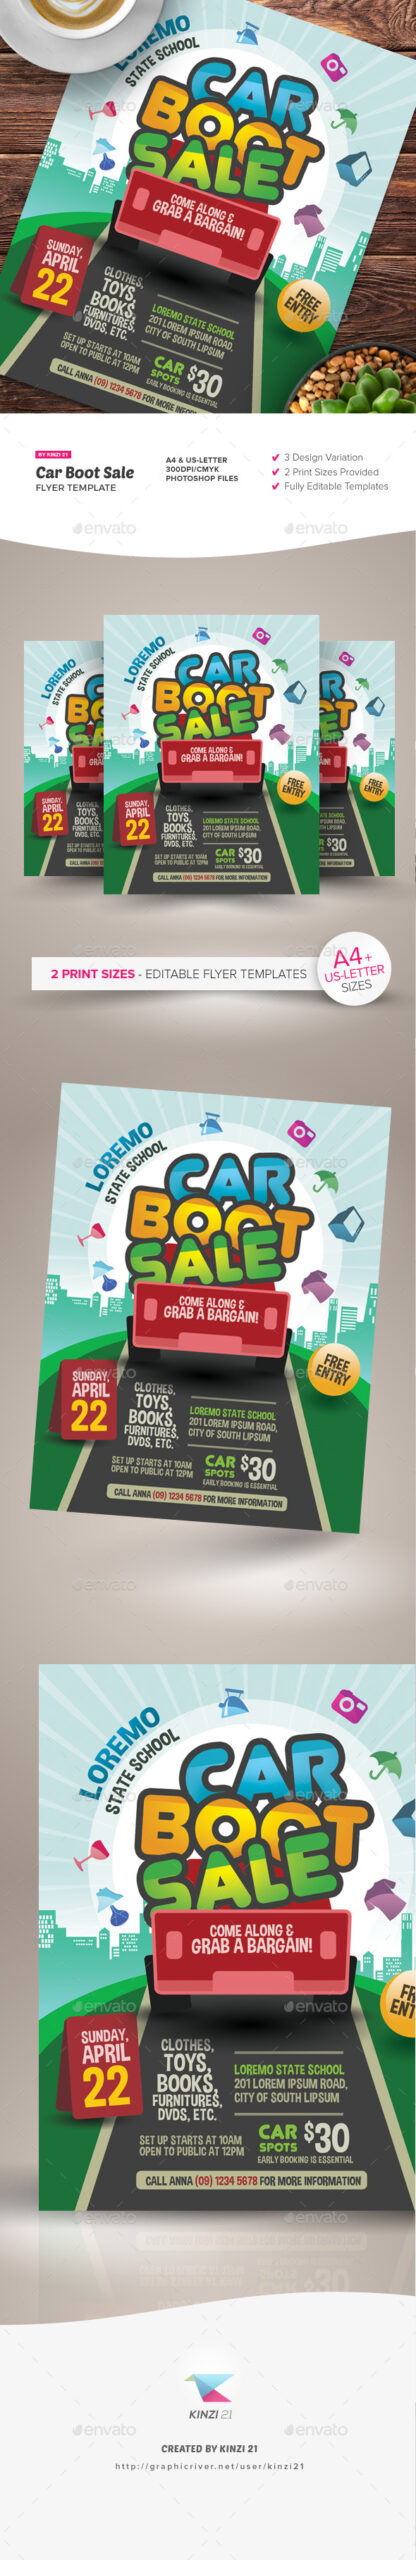 Car Boot Sale Flyer Template Intended For Trunk Show Flyer Template Regarding Trunk Show Flyer Template